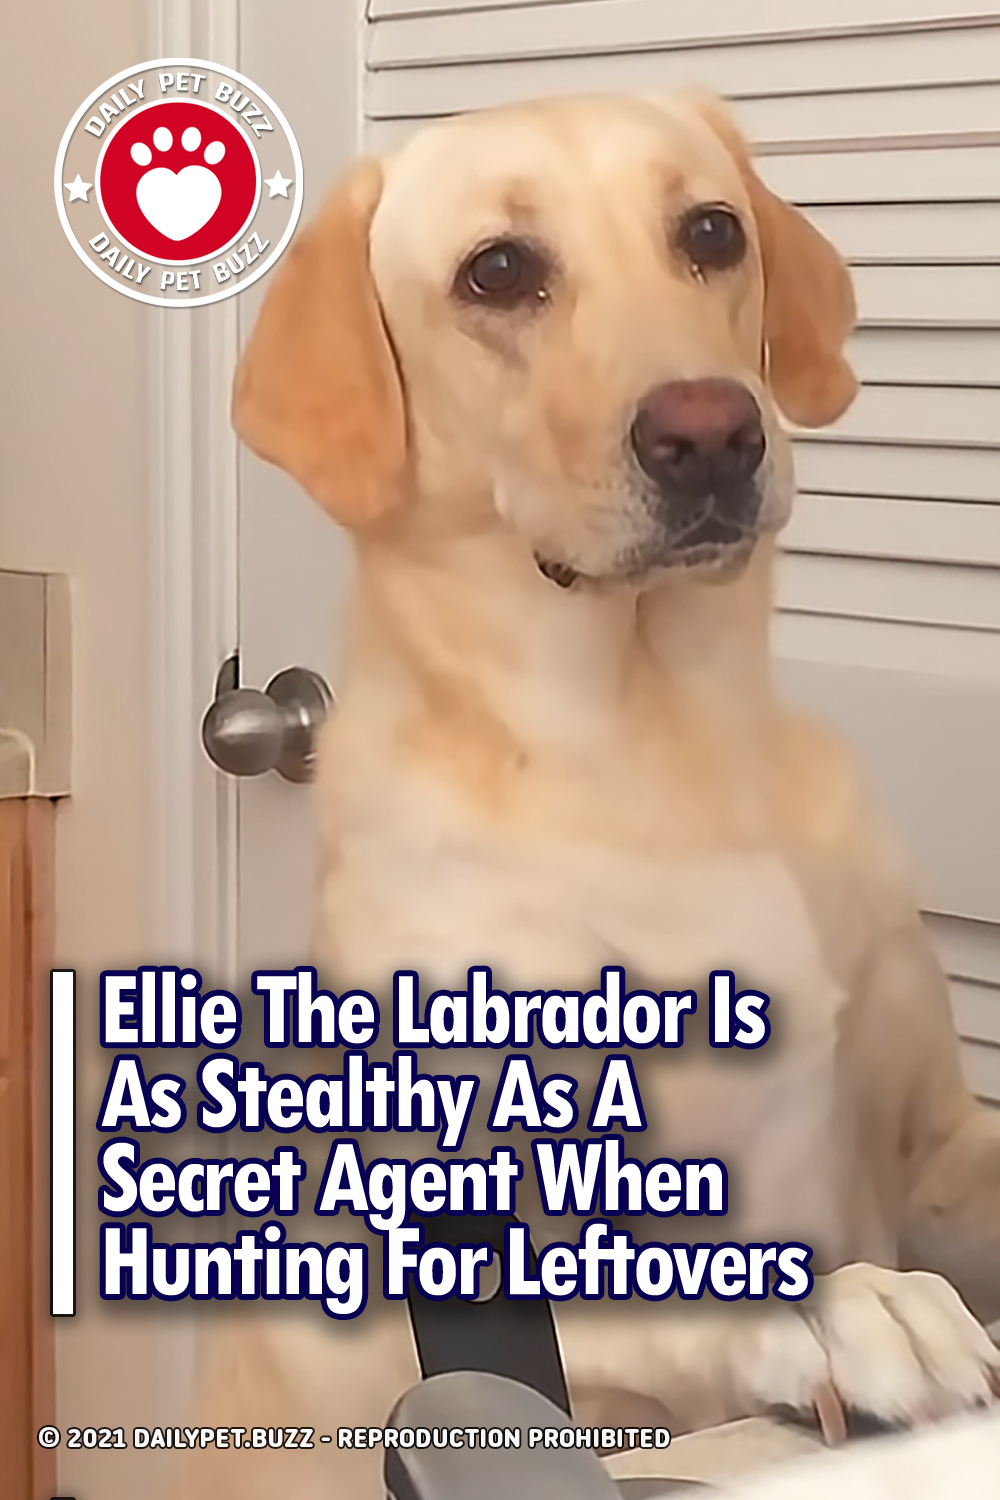 Ellie The Labrador Is As Stealthy As A Secret Agent When Hunting For Leftovers